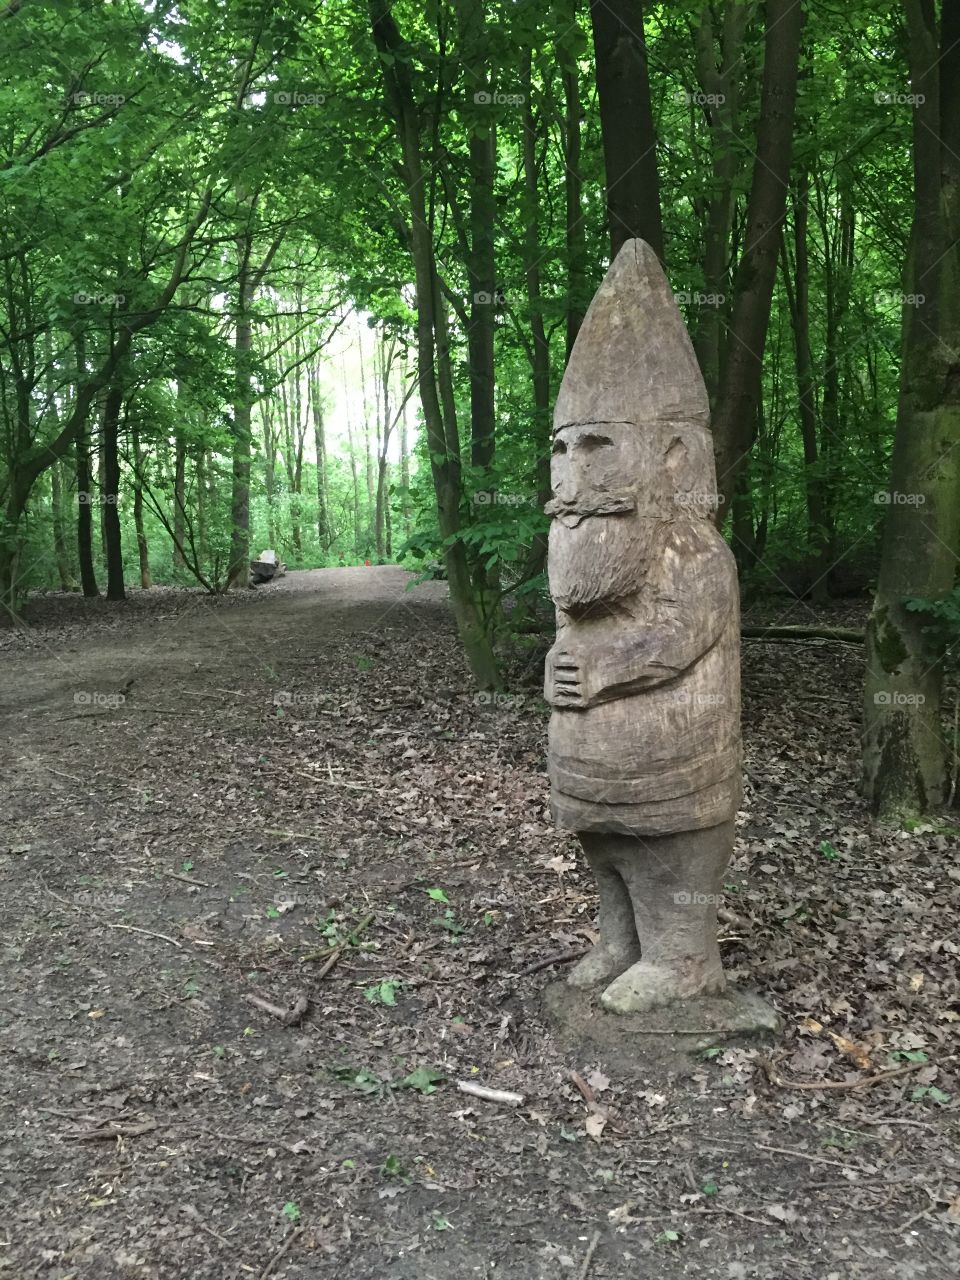 Hand made gnome in the forest